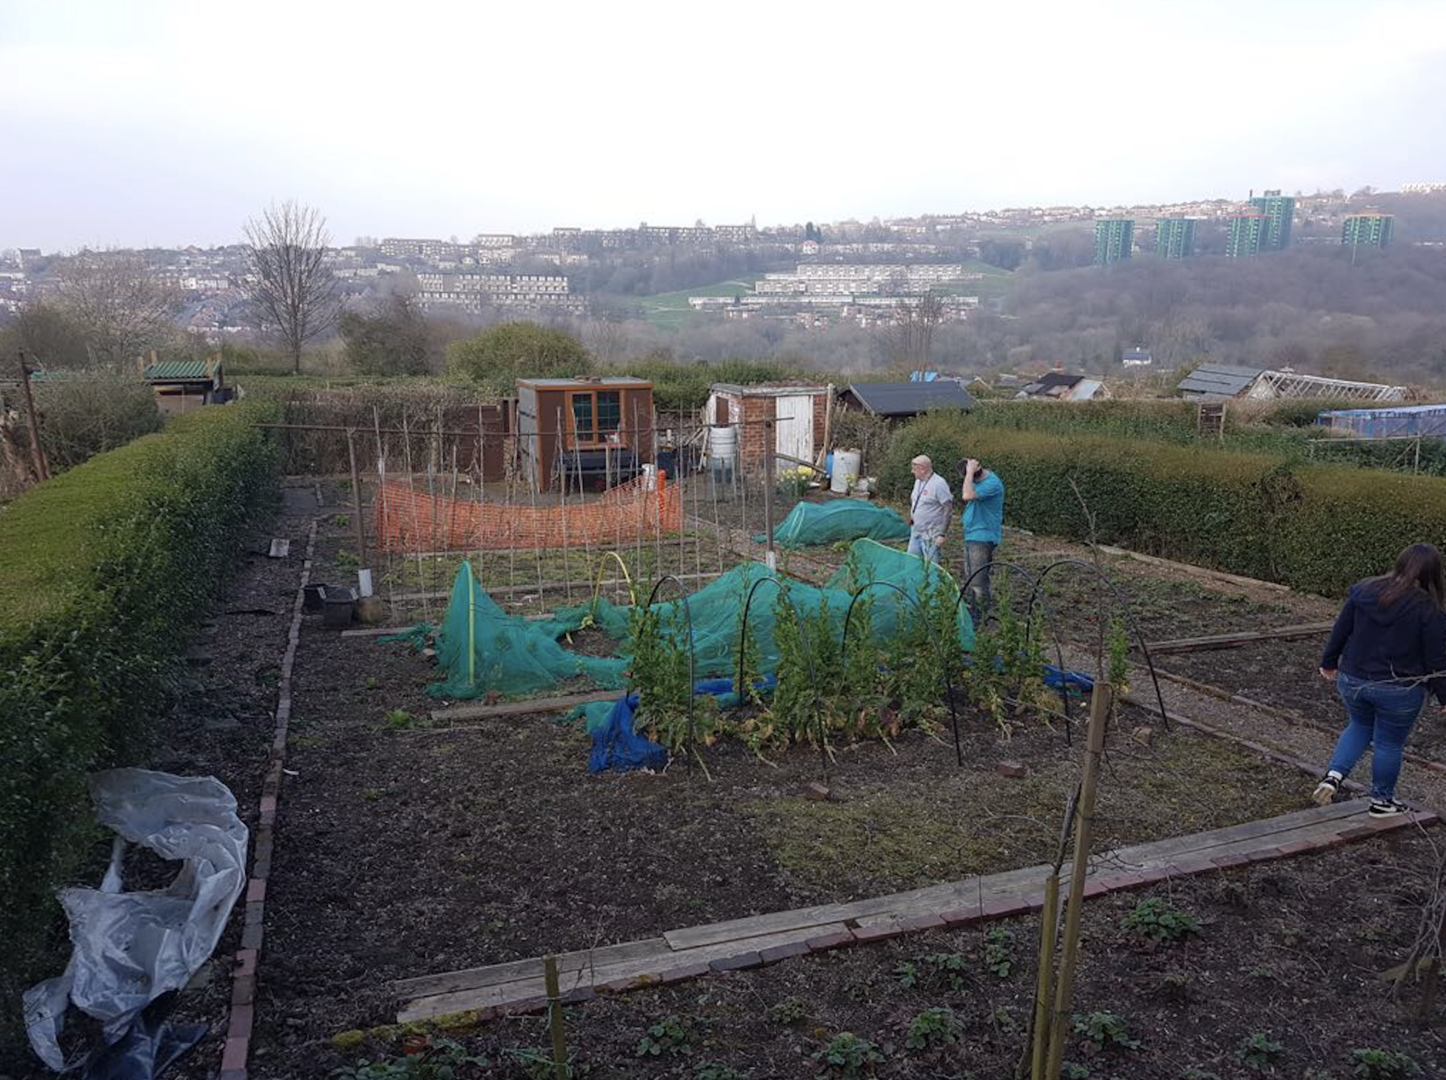 Lifehouse residents at Sheffield allotment